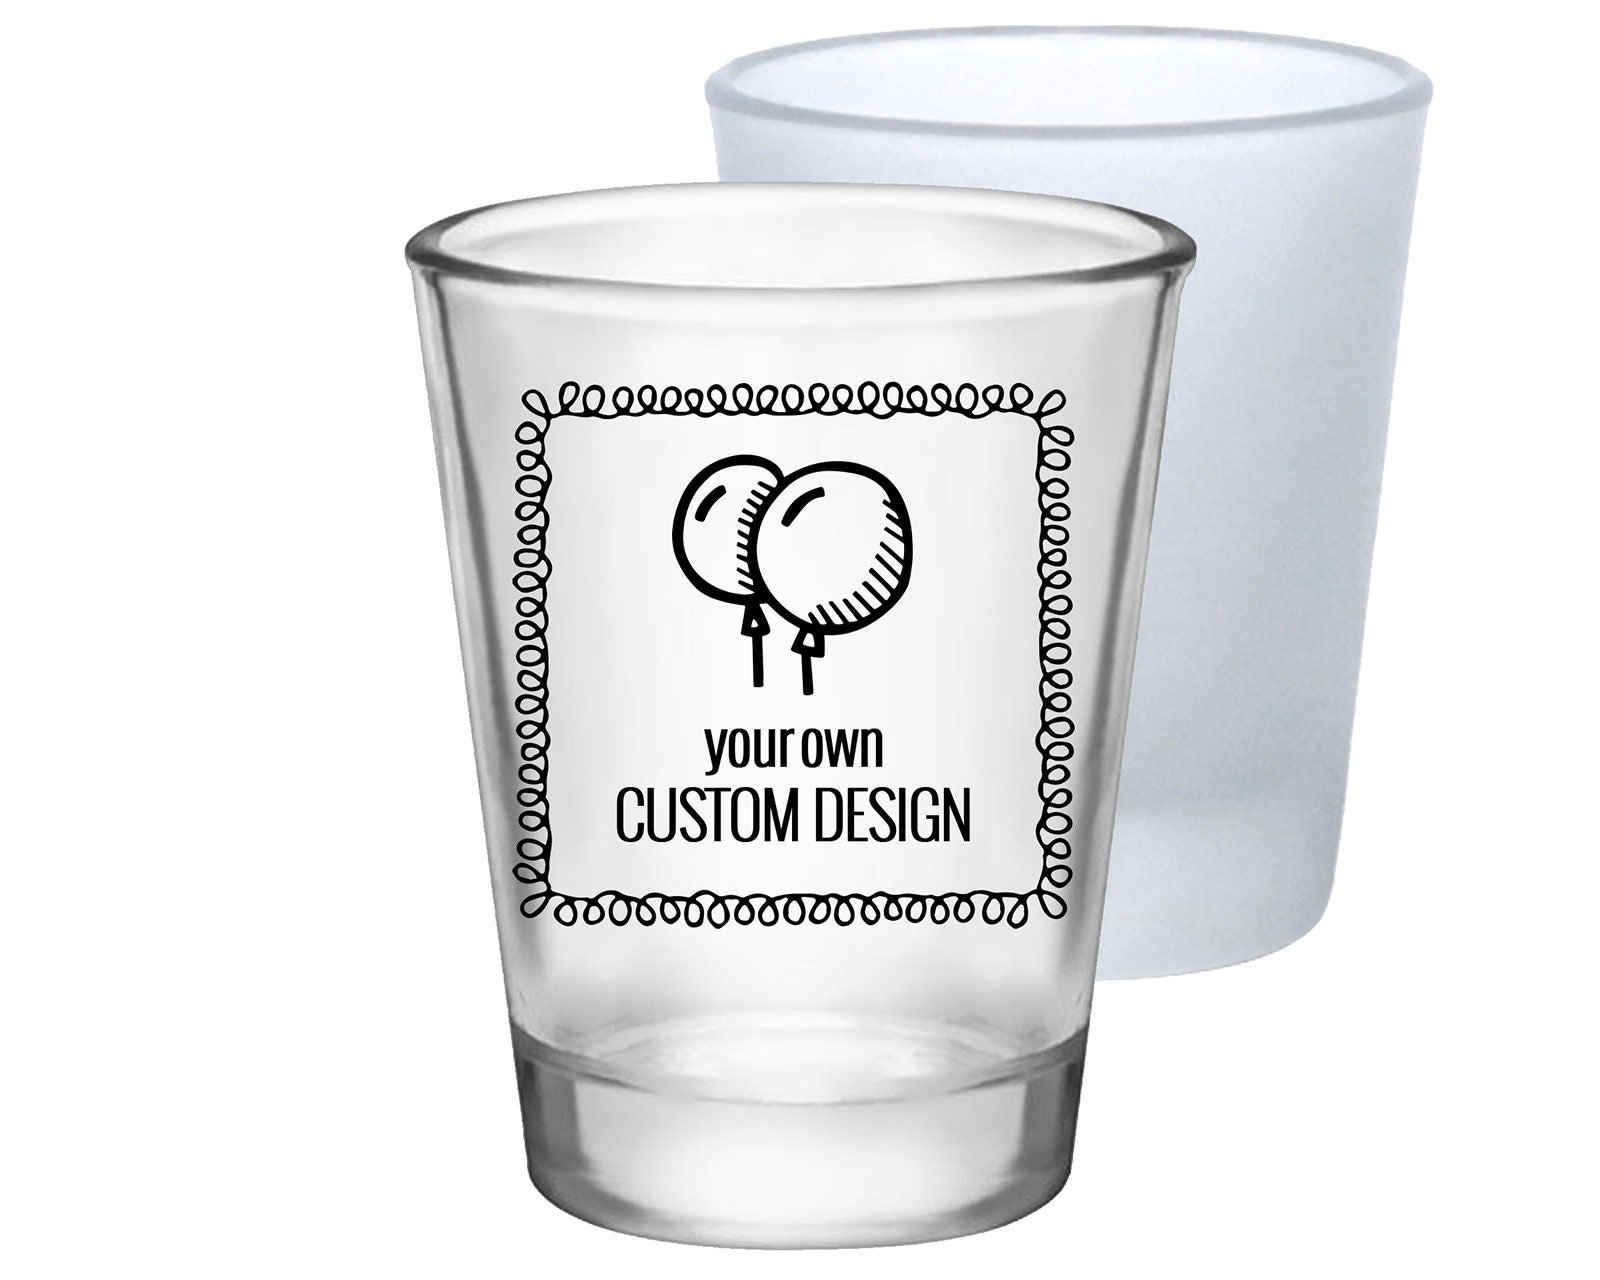 Clear/Frosted Party Favors Custom Design Gifts Personalized Shot Glasses | Birthdays Retirement Holidays & More 50 Print Colors